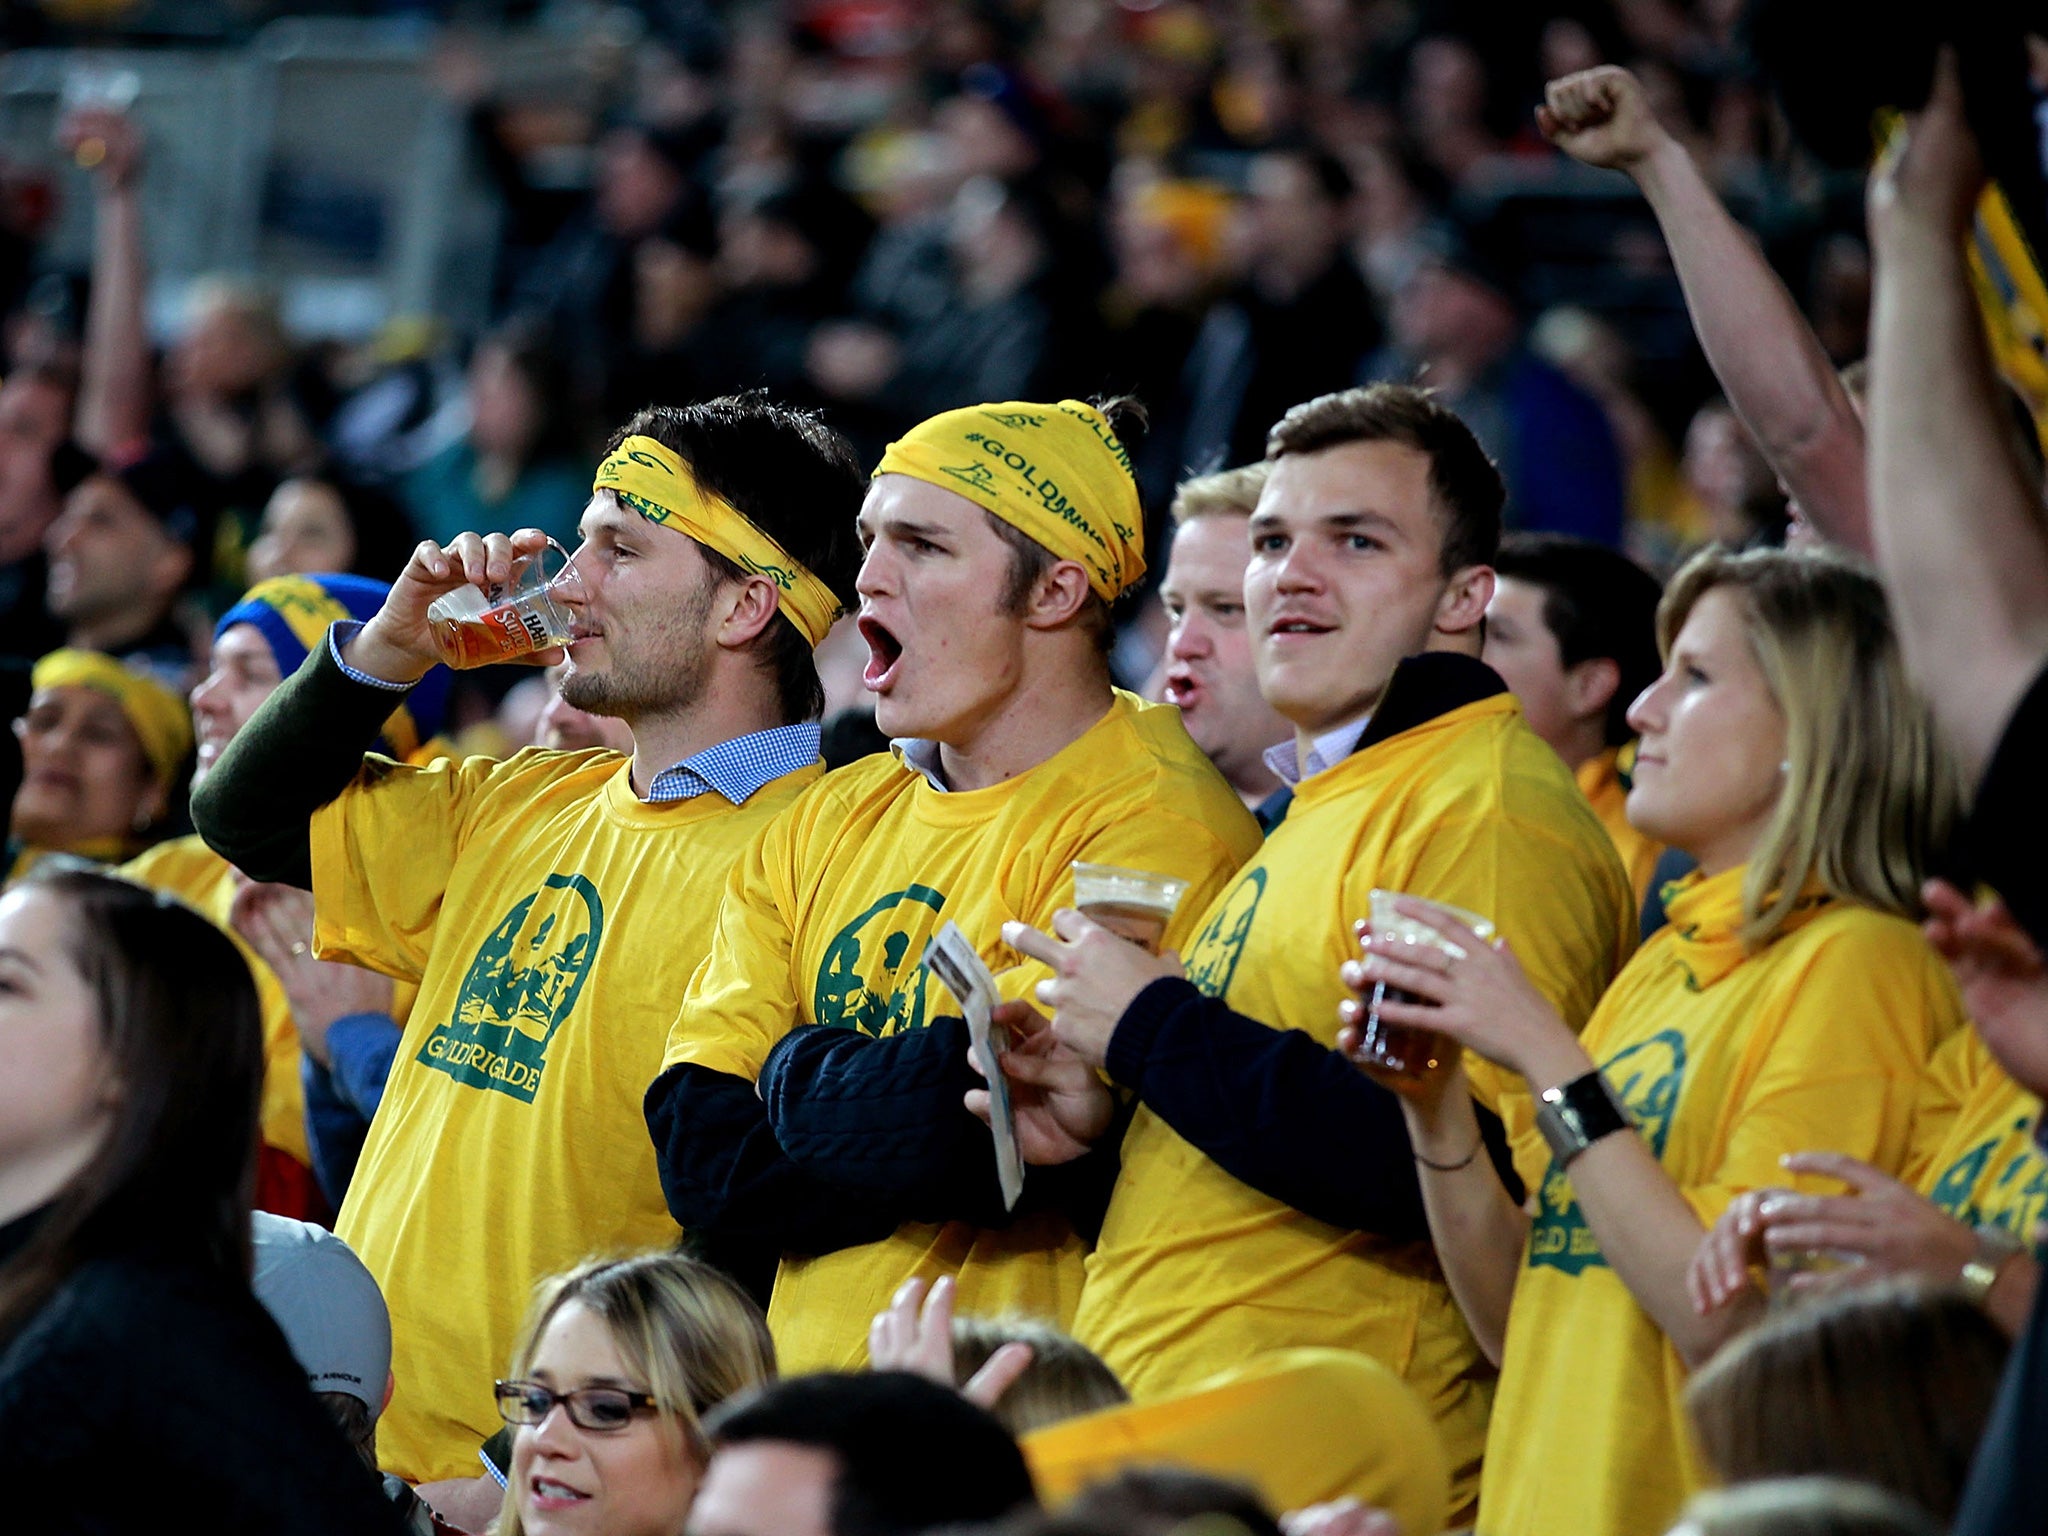 Wallabies fans watch their team take on New Zealand during The Rugby Championship in August